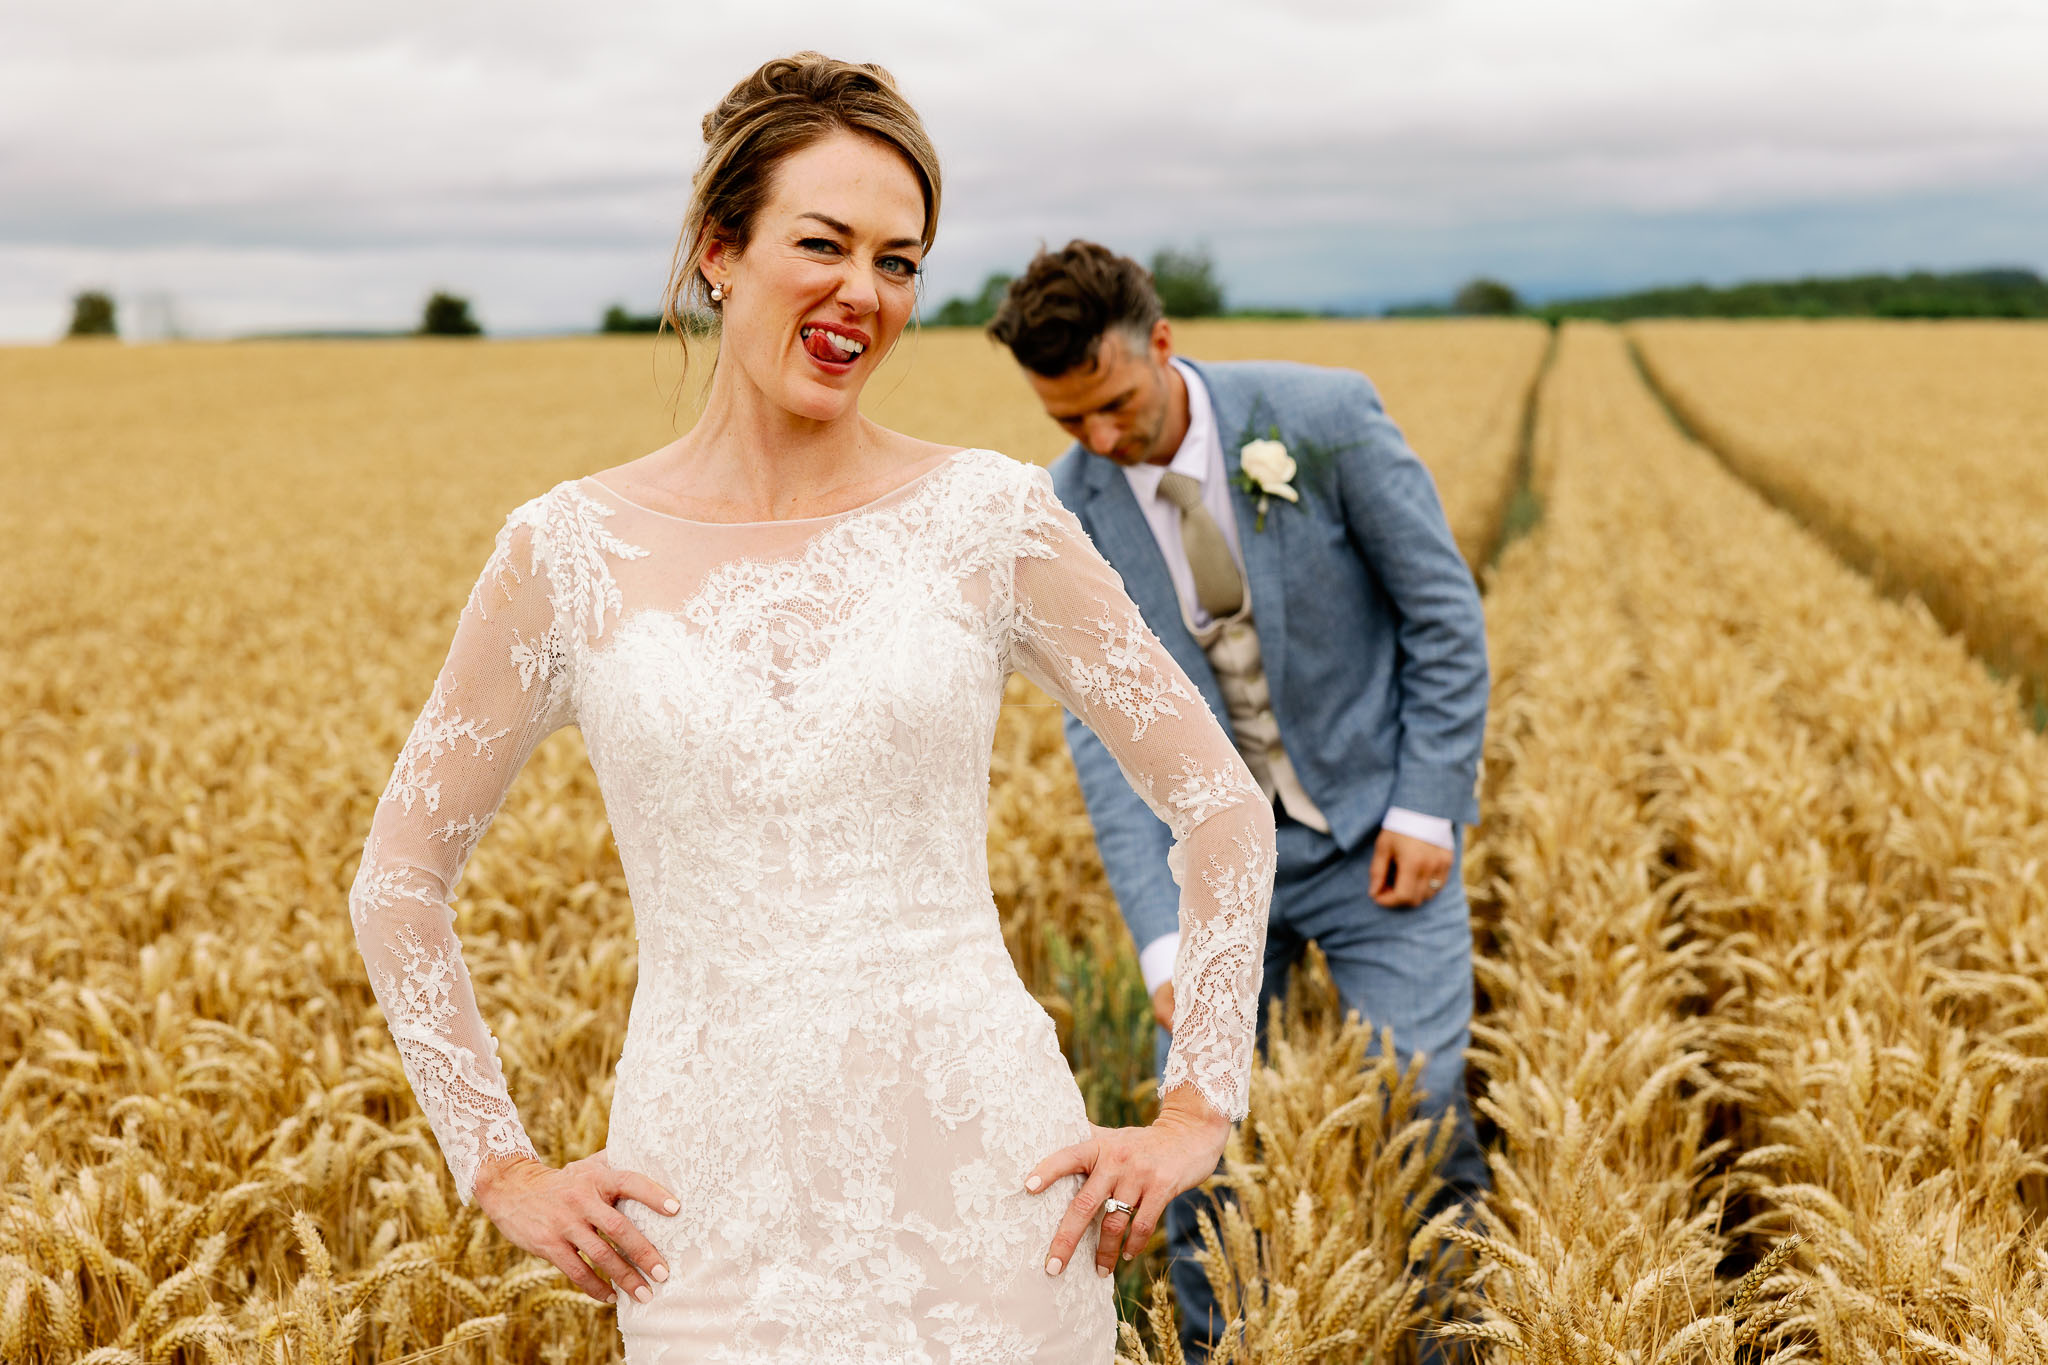 Fun Pictures of a Yorkshire Bride and groom, bride wearing Pronovias and groom wearing blue hugo boss